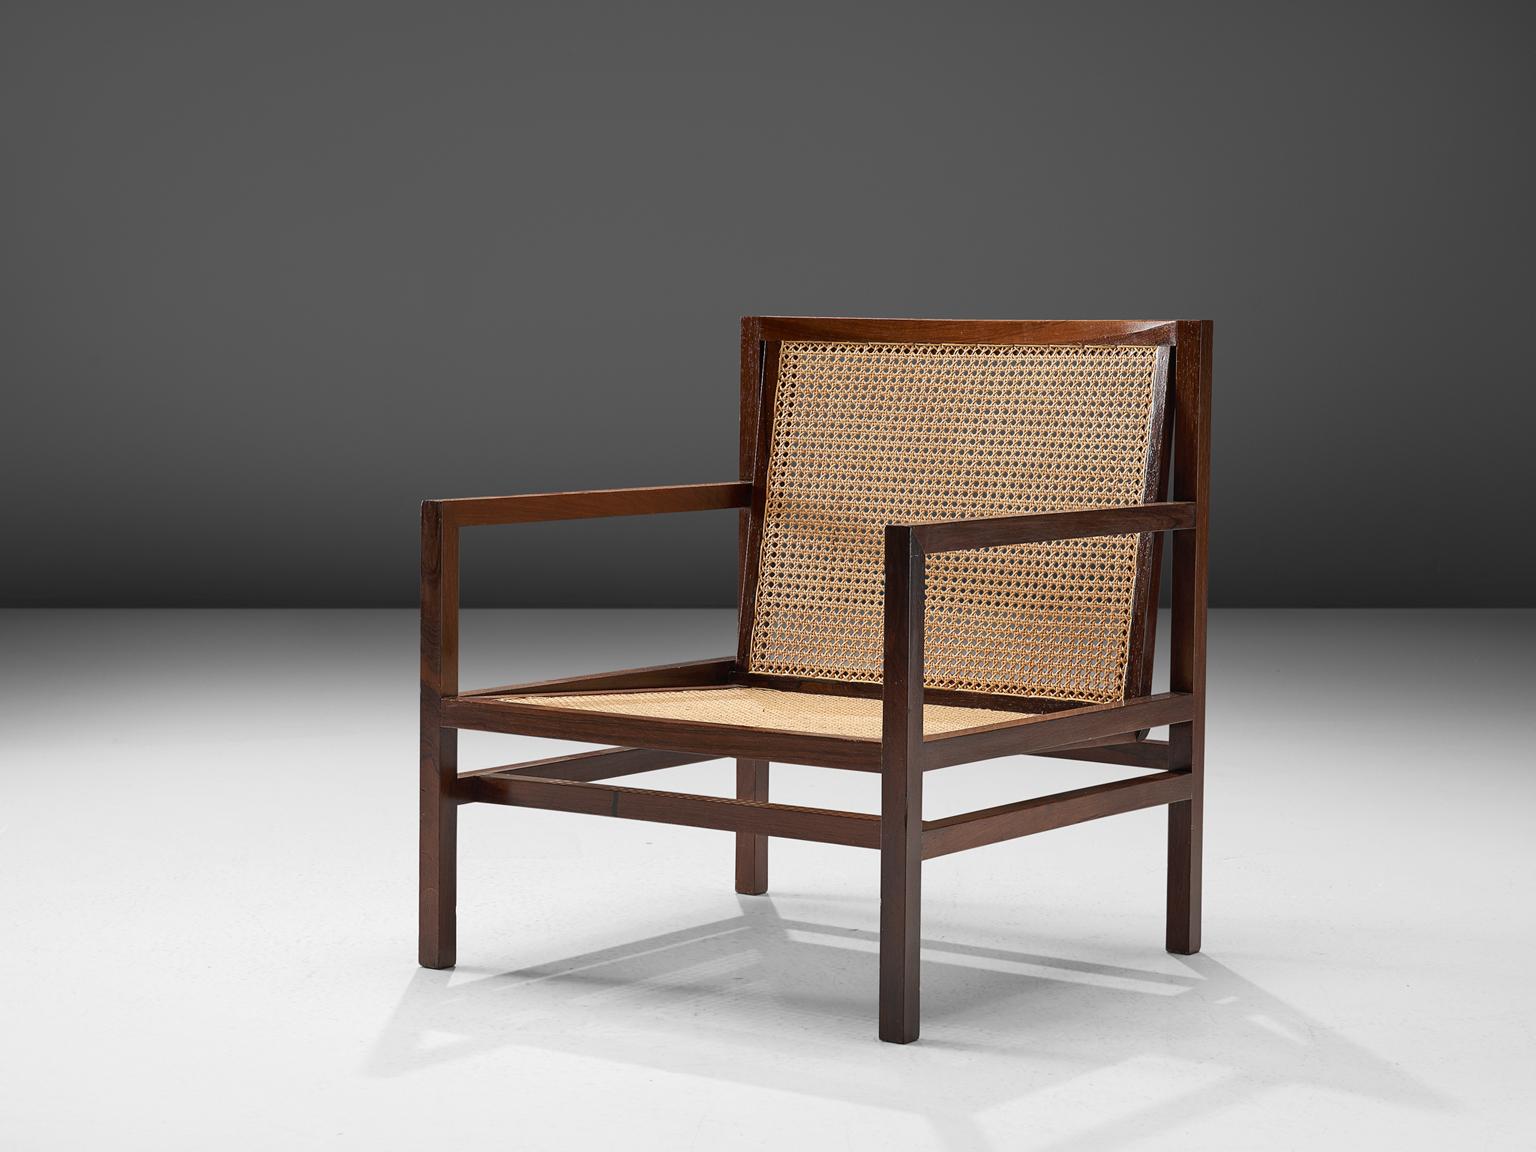 Joaquim Tenreiro, armchair, rosewood and cane, Brazil, 1958

This lounge chair is designed by the Brazilian master designer Joaquim Tenreiro. This chair designed around 1958 has typical traits of the design by Tenreiro. First of all the use of